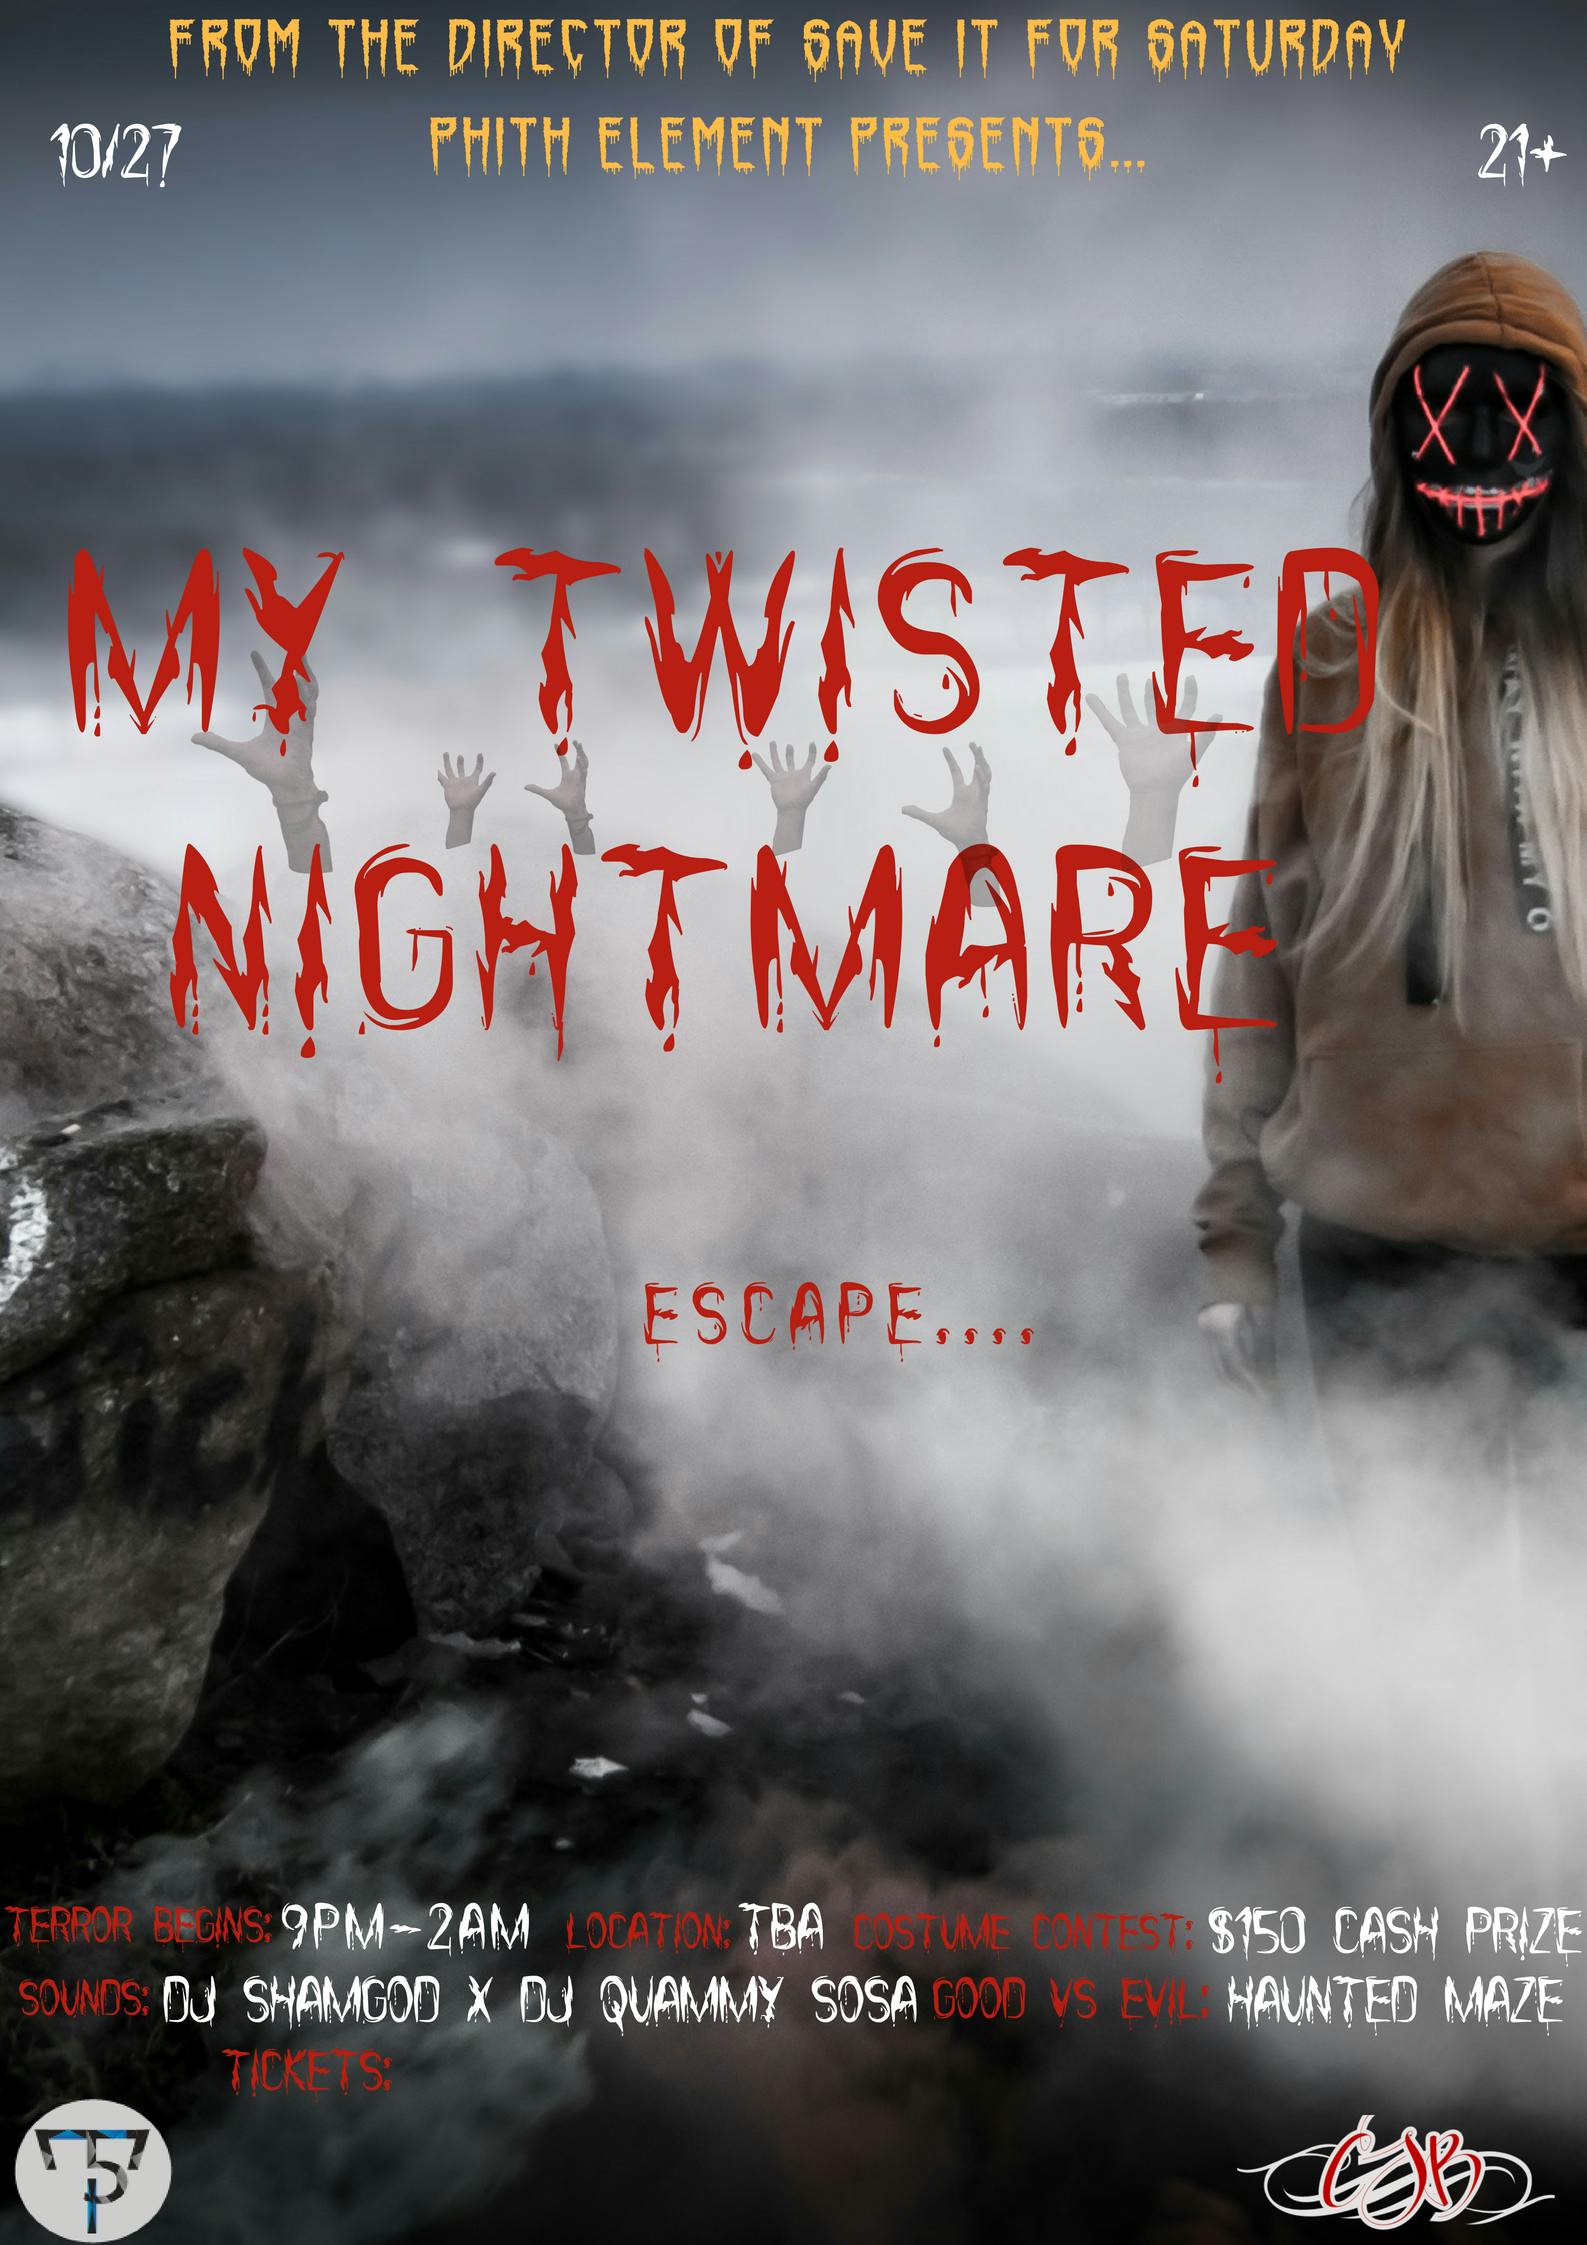 Save It For Saturday: My Twisted Nightmare